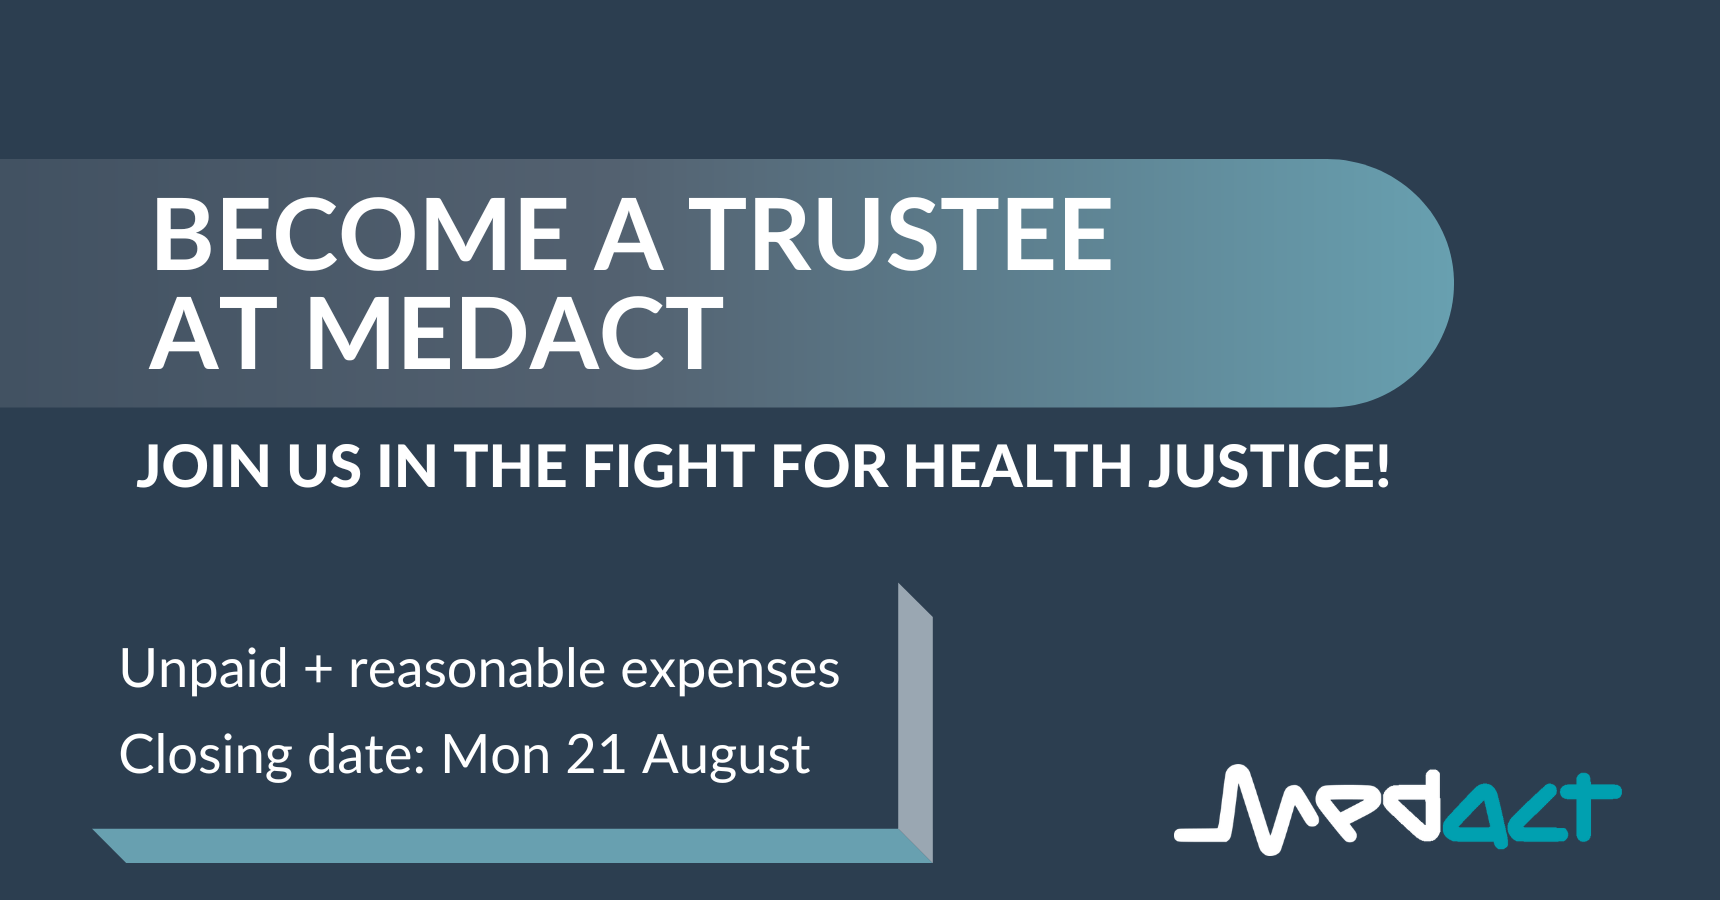 Become a trustee at Medact. Unpaid + reasonable expenses. Closing date: Mon 21 August.